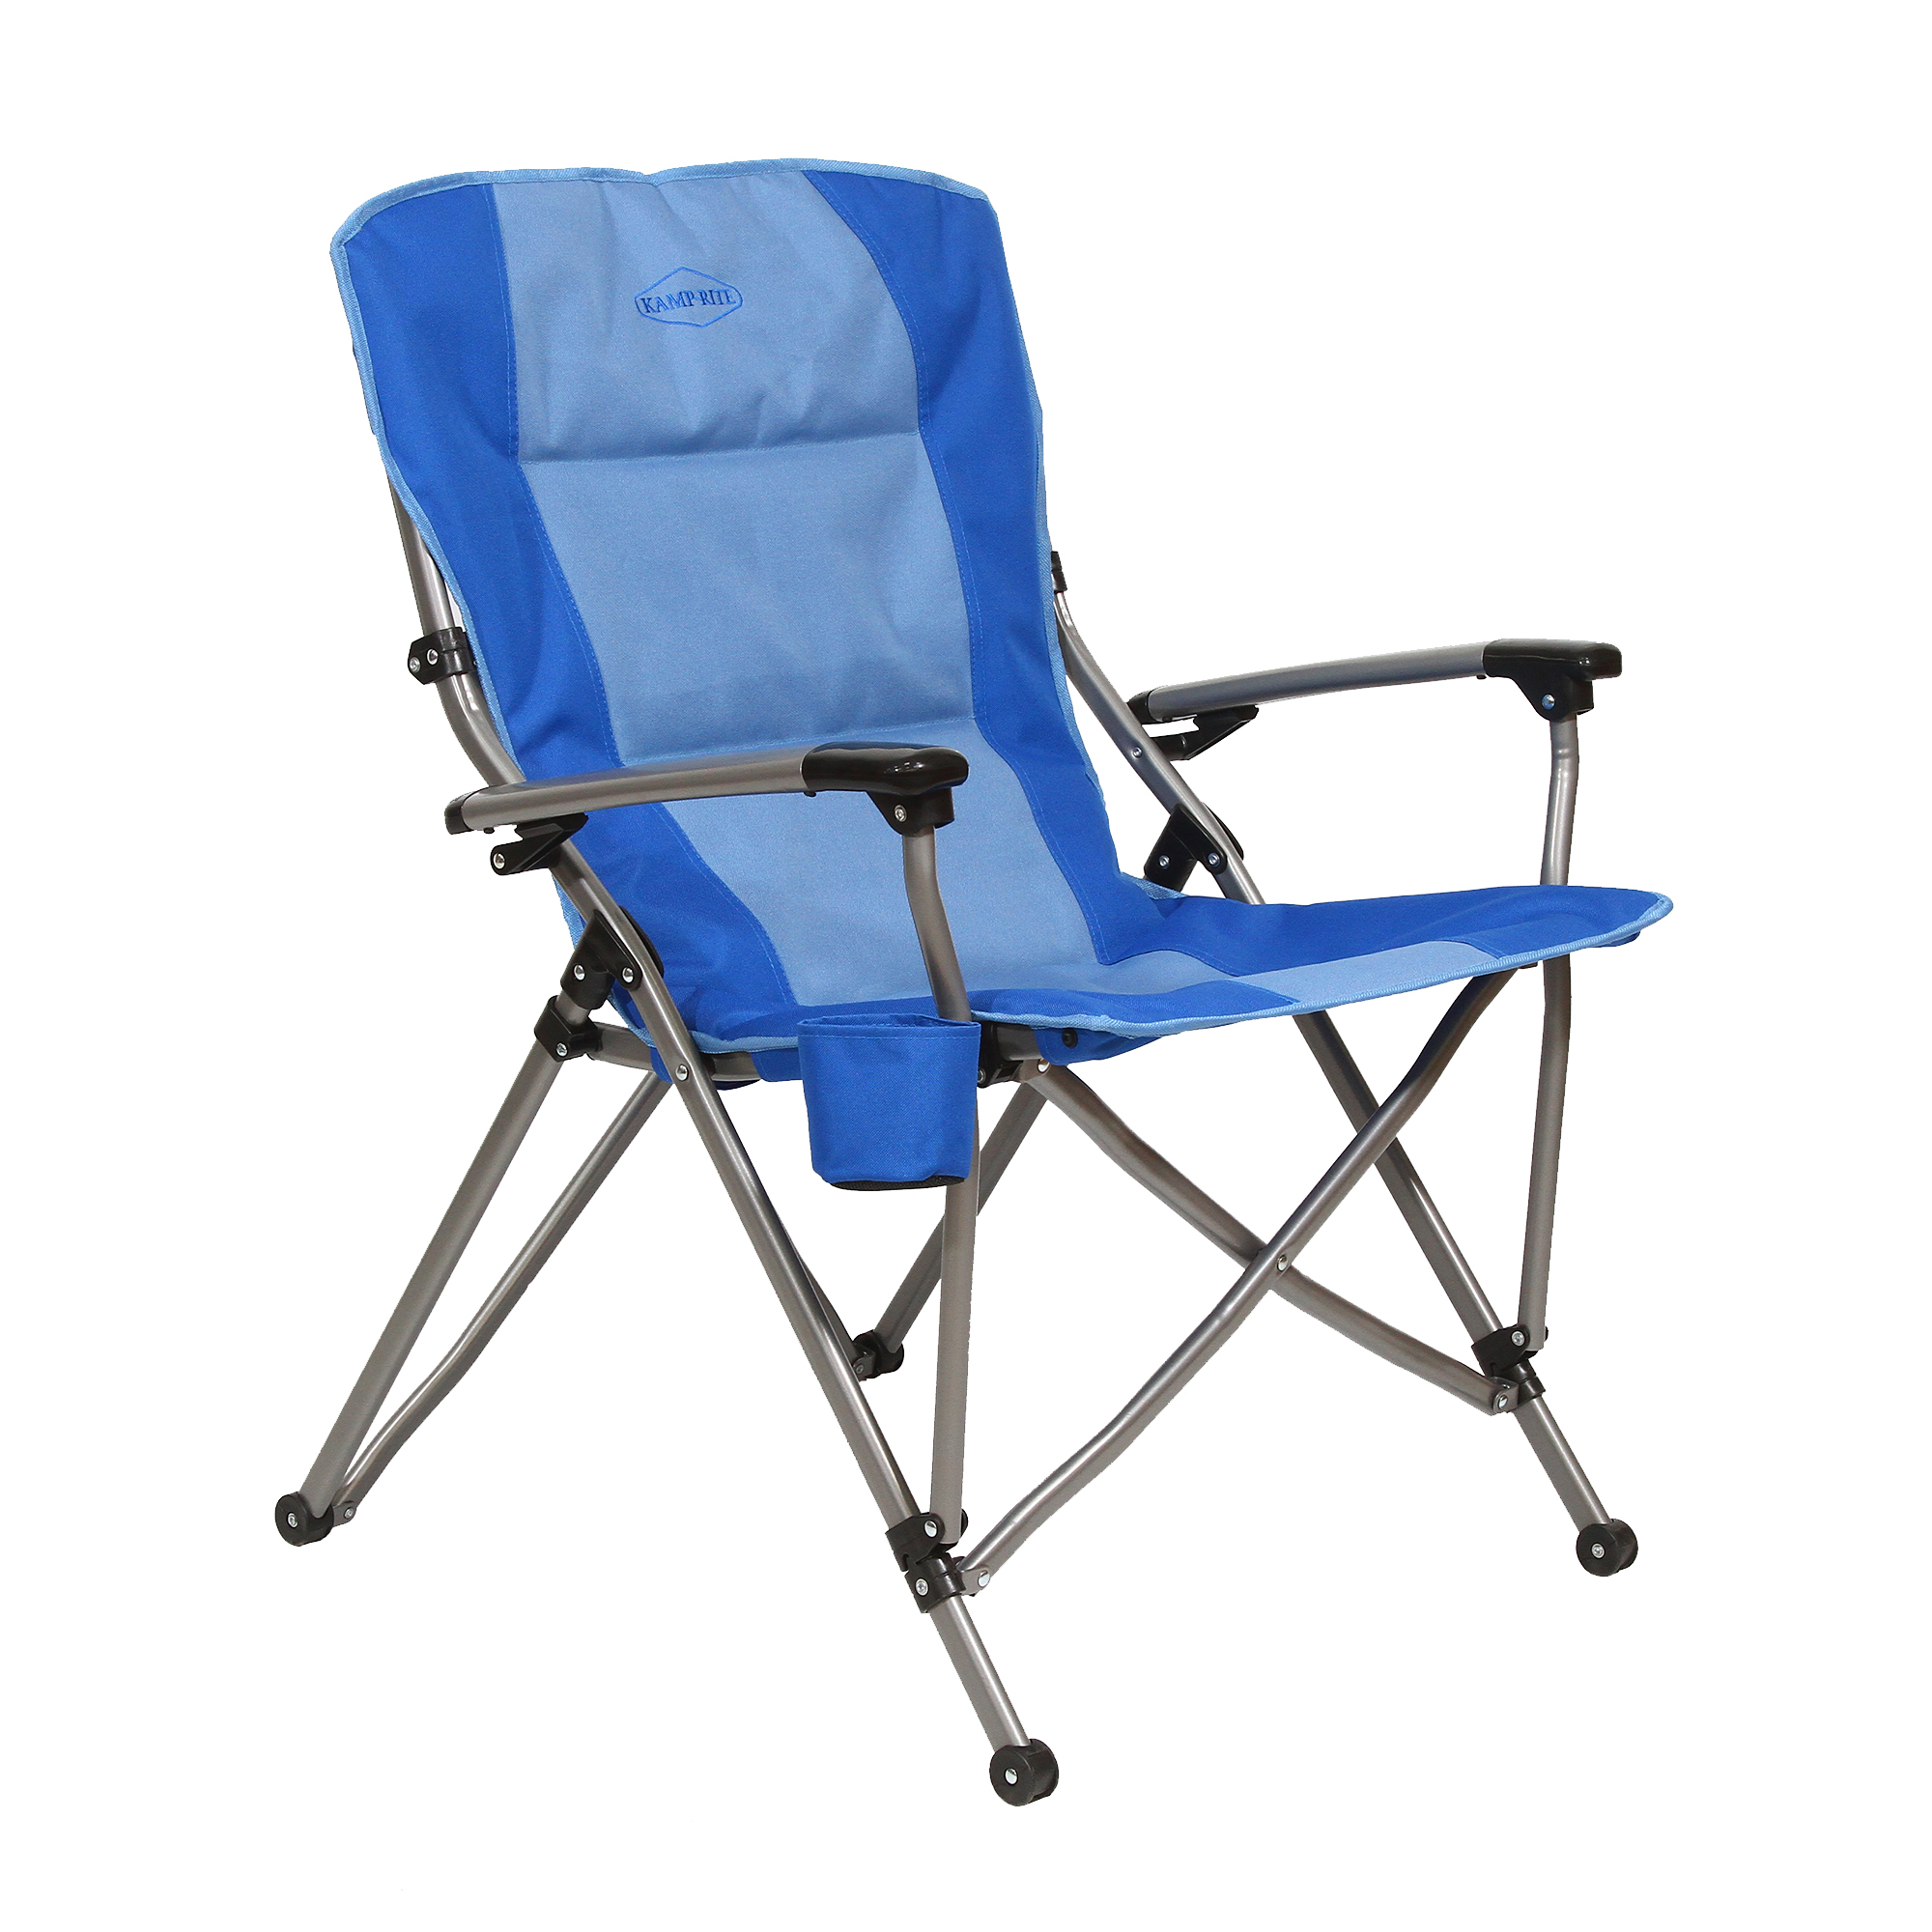 MEMBER'S Mark Oversized Folding Hard ARM Lawn Chair 325 LB Color: Blue New 